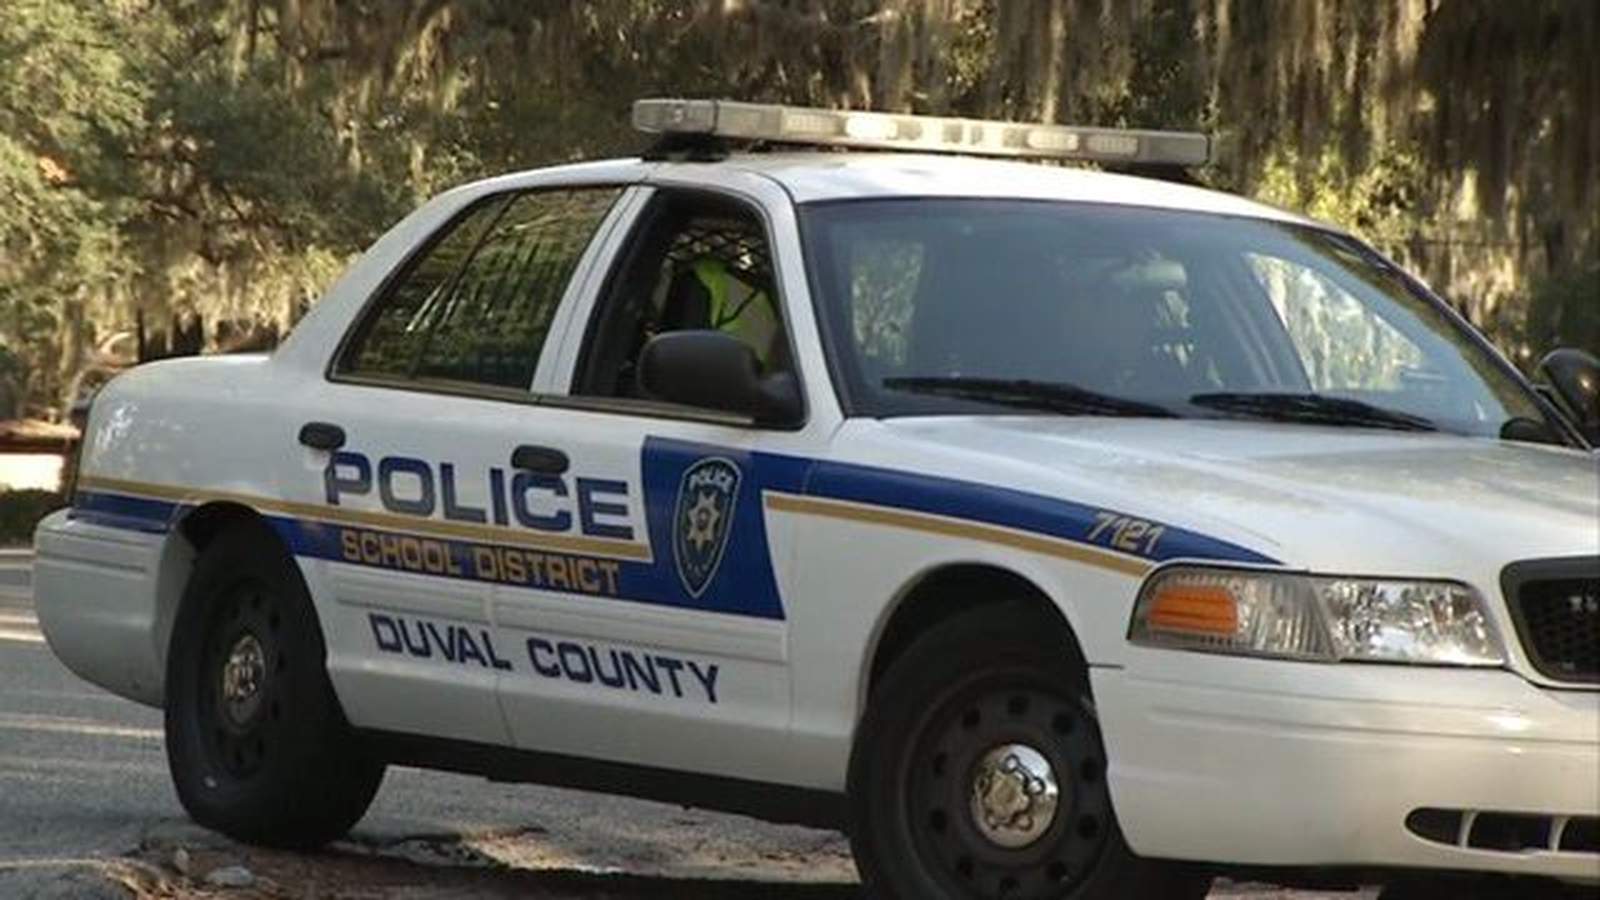 Grand jury blasts Duval County School Police crime reporting as ‘chicanery’